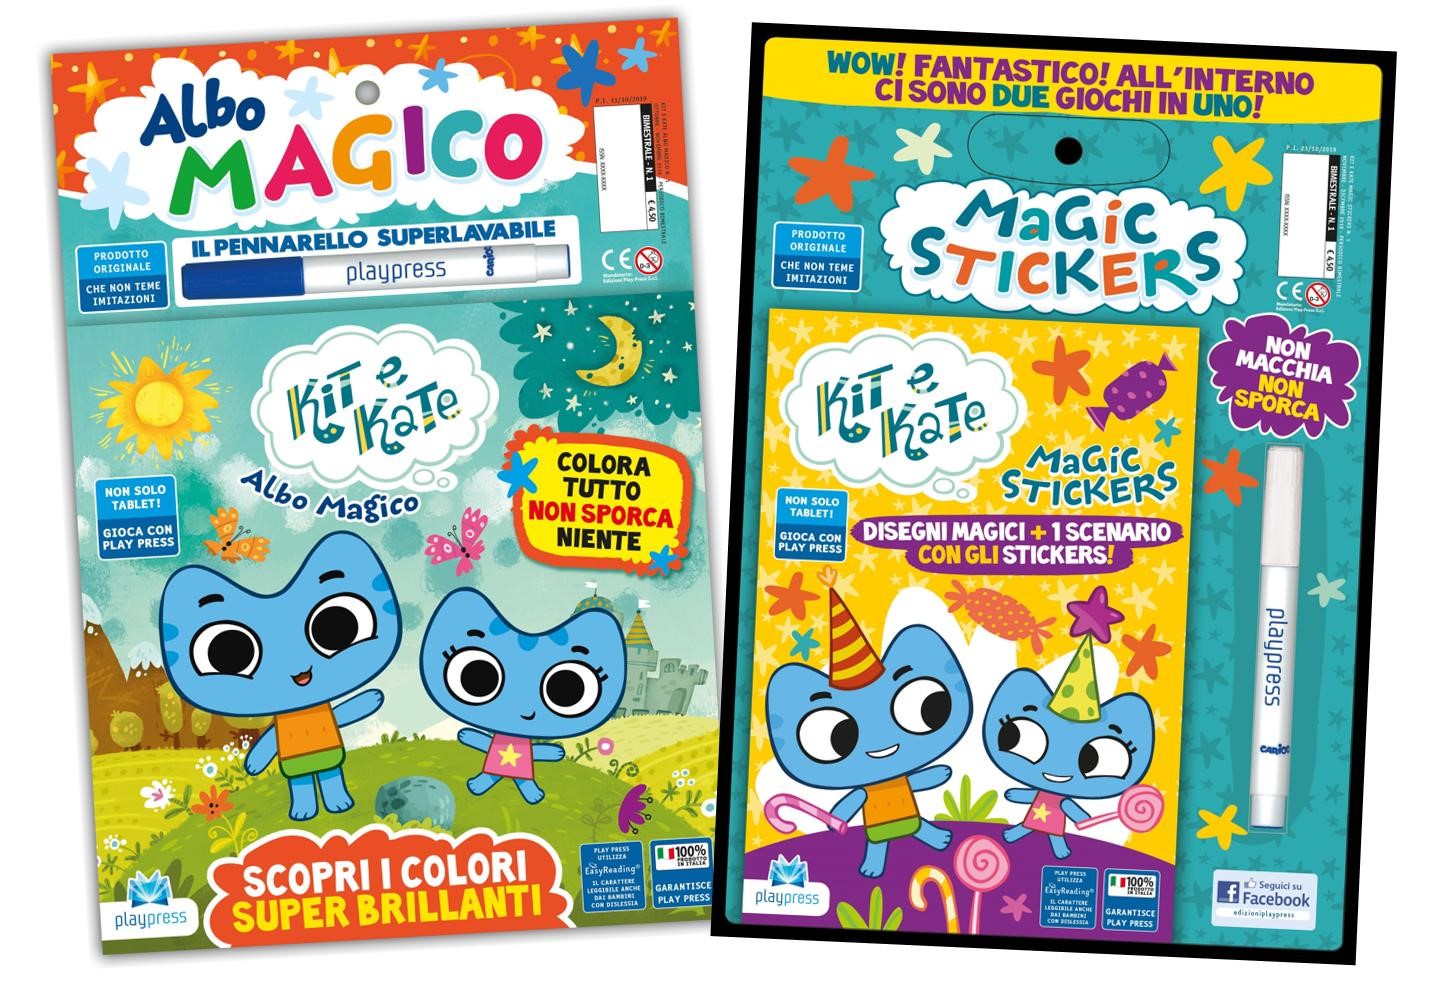 Preschool animation Kit and Kate is now the inspiration for sticker and magic albums from Edizioni PlayPress image